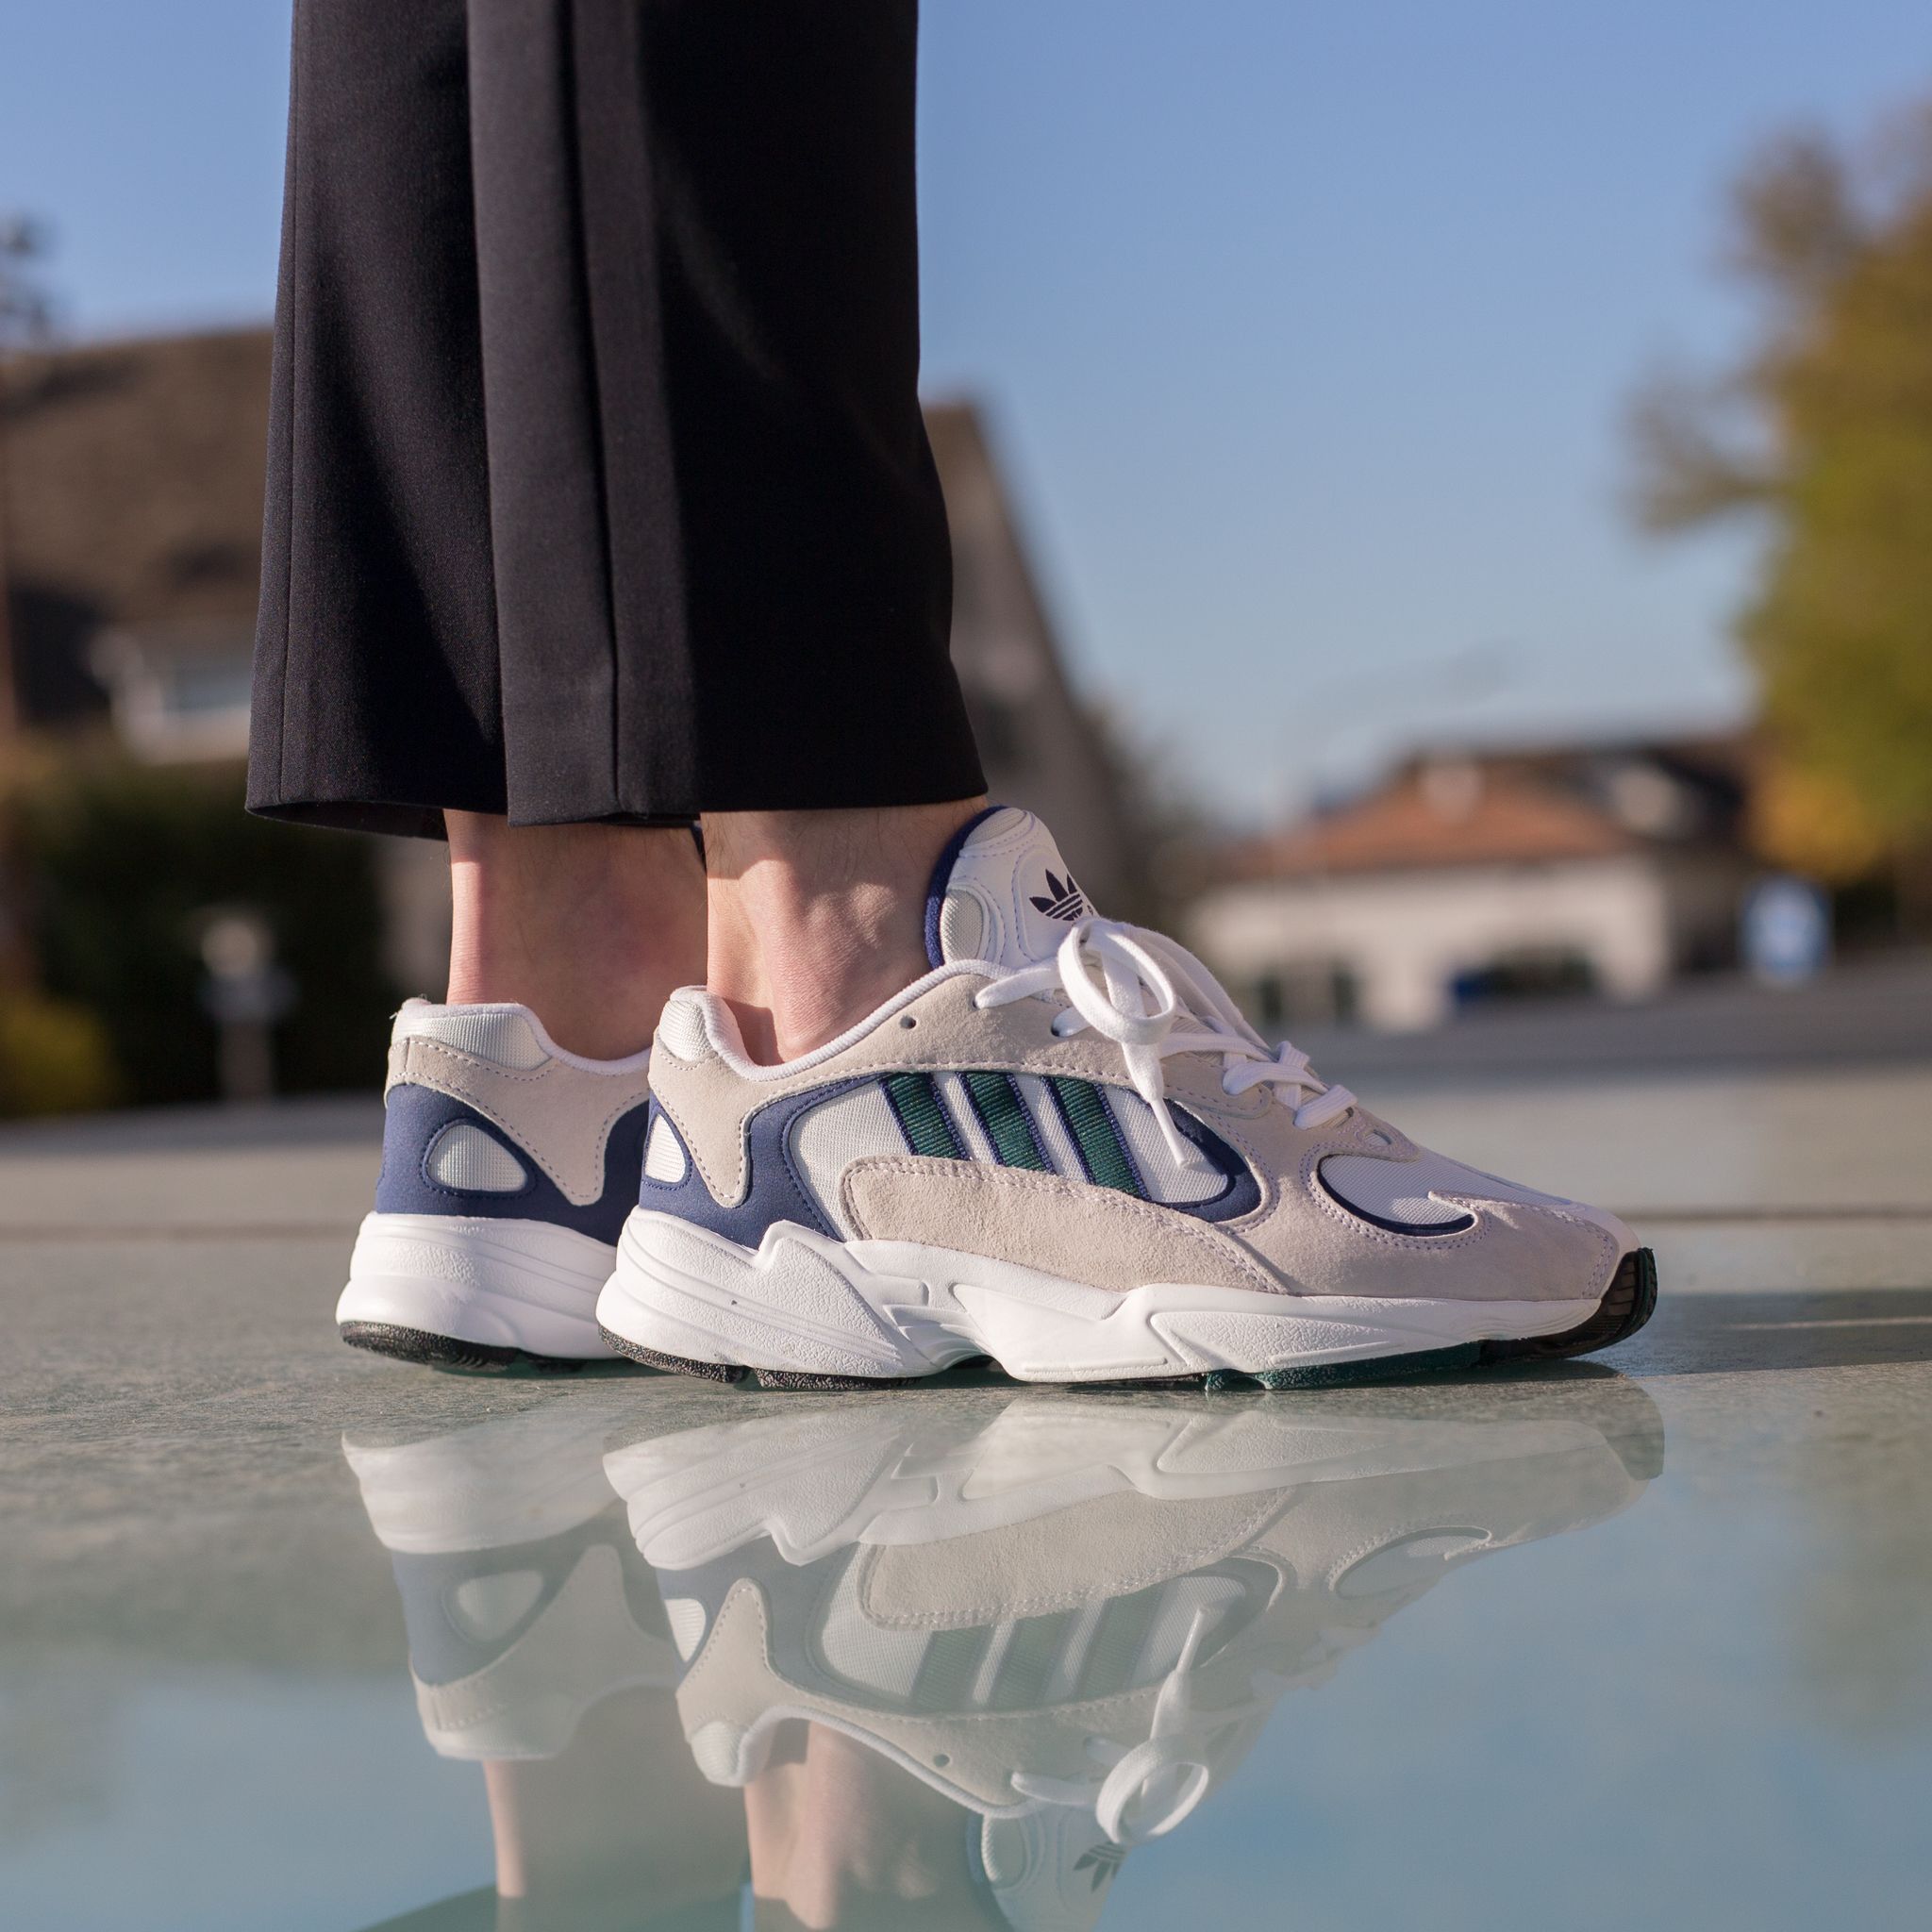 taart herstel beet Titolo on Twitter: "Take a look at our #sale ❗ Adidas Yung-1 - Footwear  White/Noble Green/Dark Blue don't miss out! 😎 https://t.co/7DSxuYZh6U # adidas #yung1 #yung #white #green #blue #sale #sales #wintersale  #endofyearsale